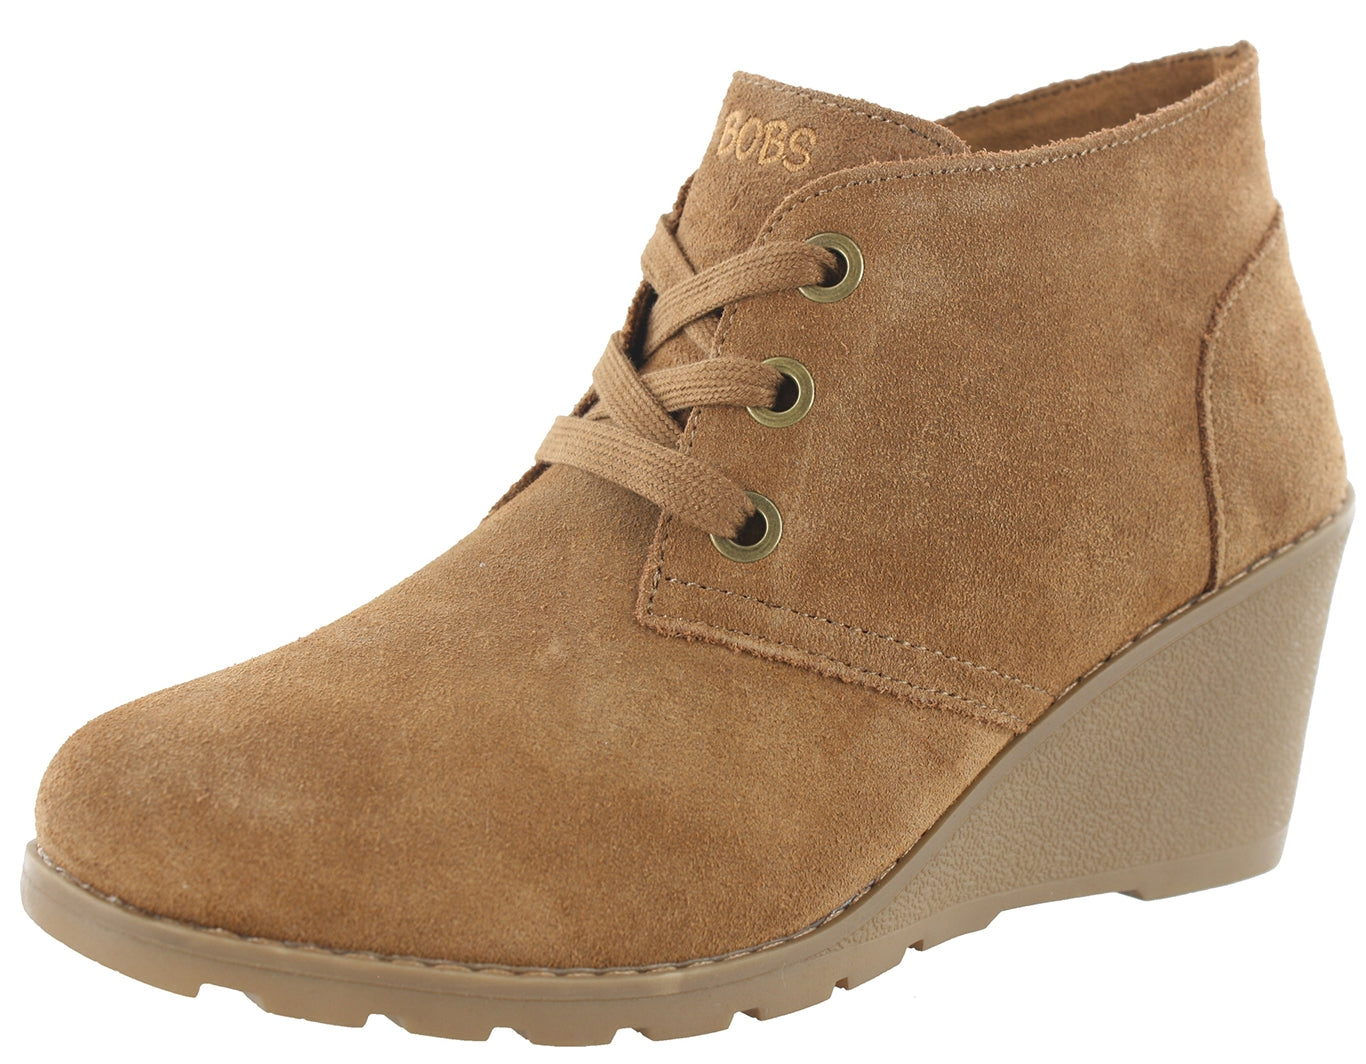 Skechers Tumble Weed Ghost Wedge Ankle Chukka Boots - Shoe City